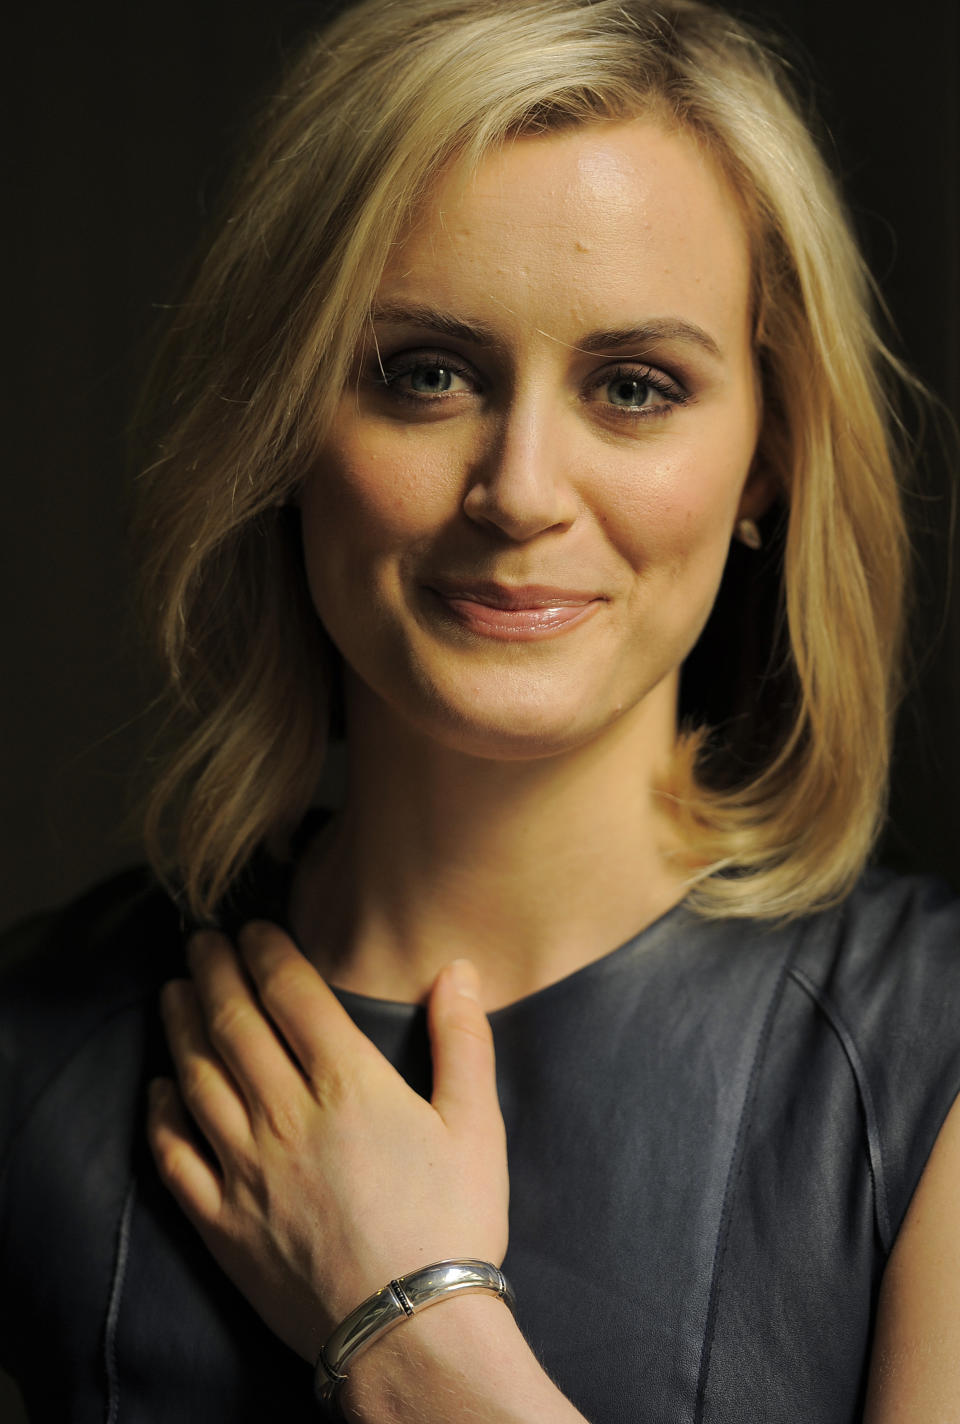 In this Monday, March 17, 2014 photo, actress Taylor Schilling poses for a portrait in Los Angeles. Schilling stars as Piper Chapman in the Lionsgate television series, "Orange Is the New Black." Season two debuts on Netflix on June 6, 2014. (Photo by Chris Pizzello/Invision/AP)